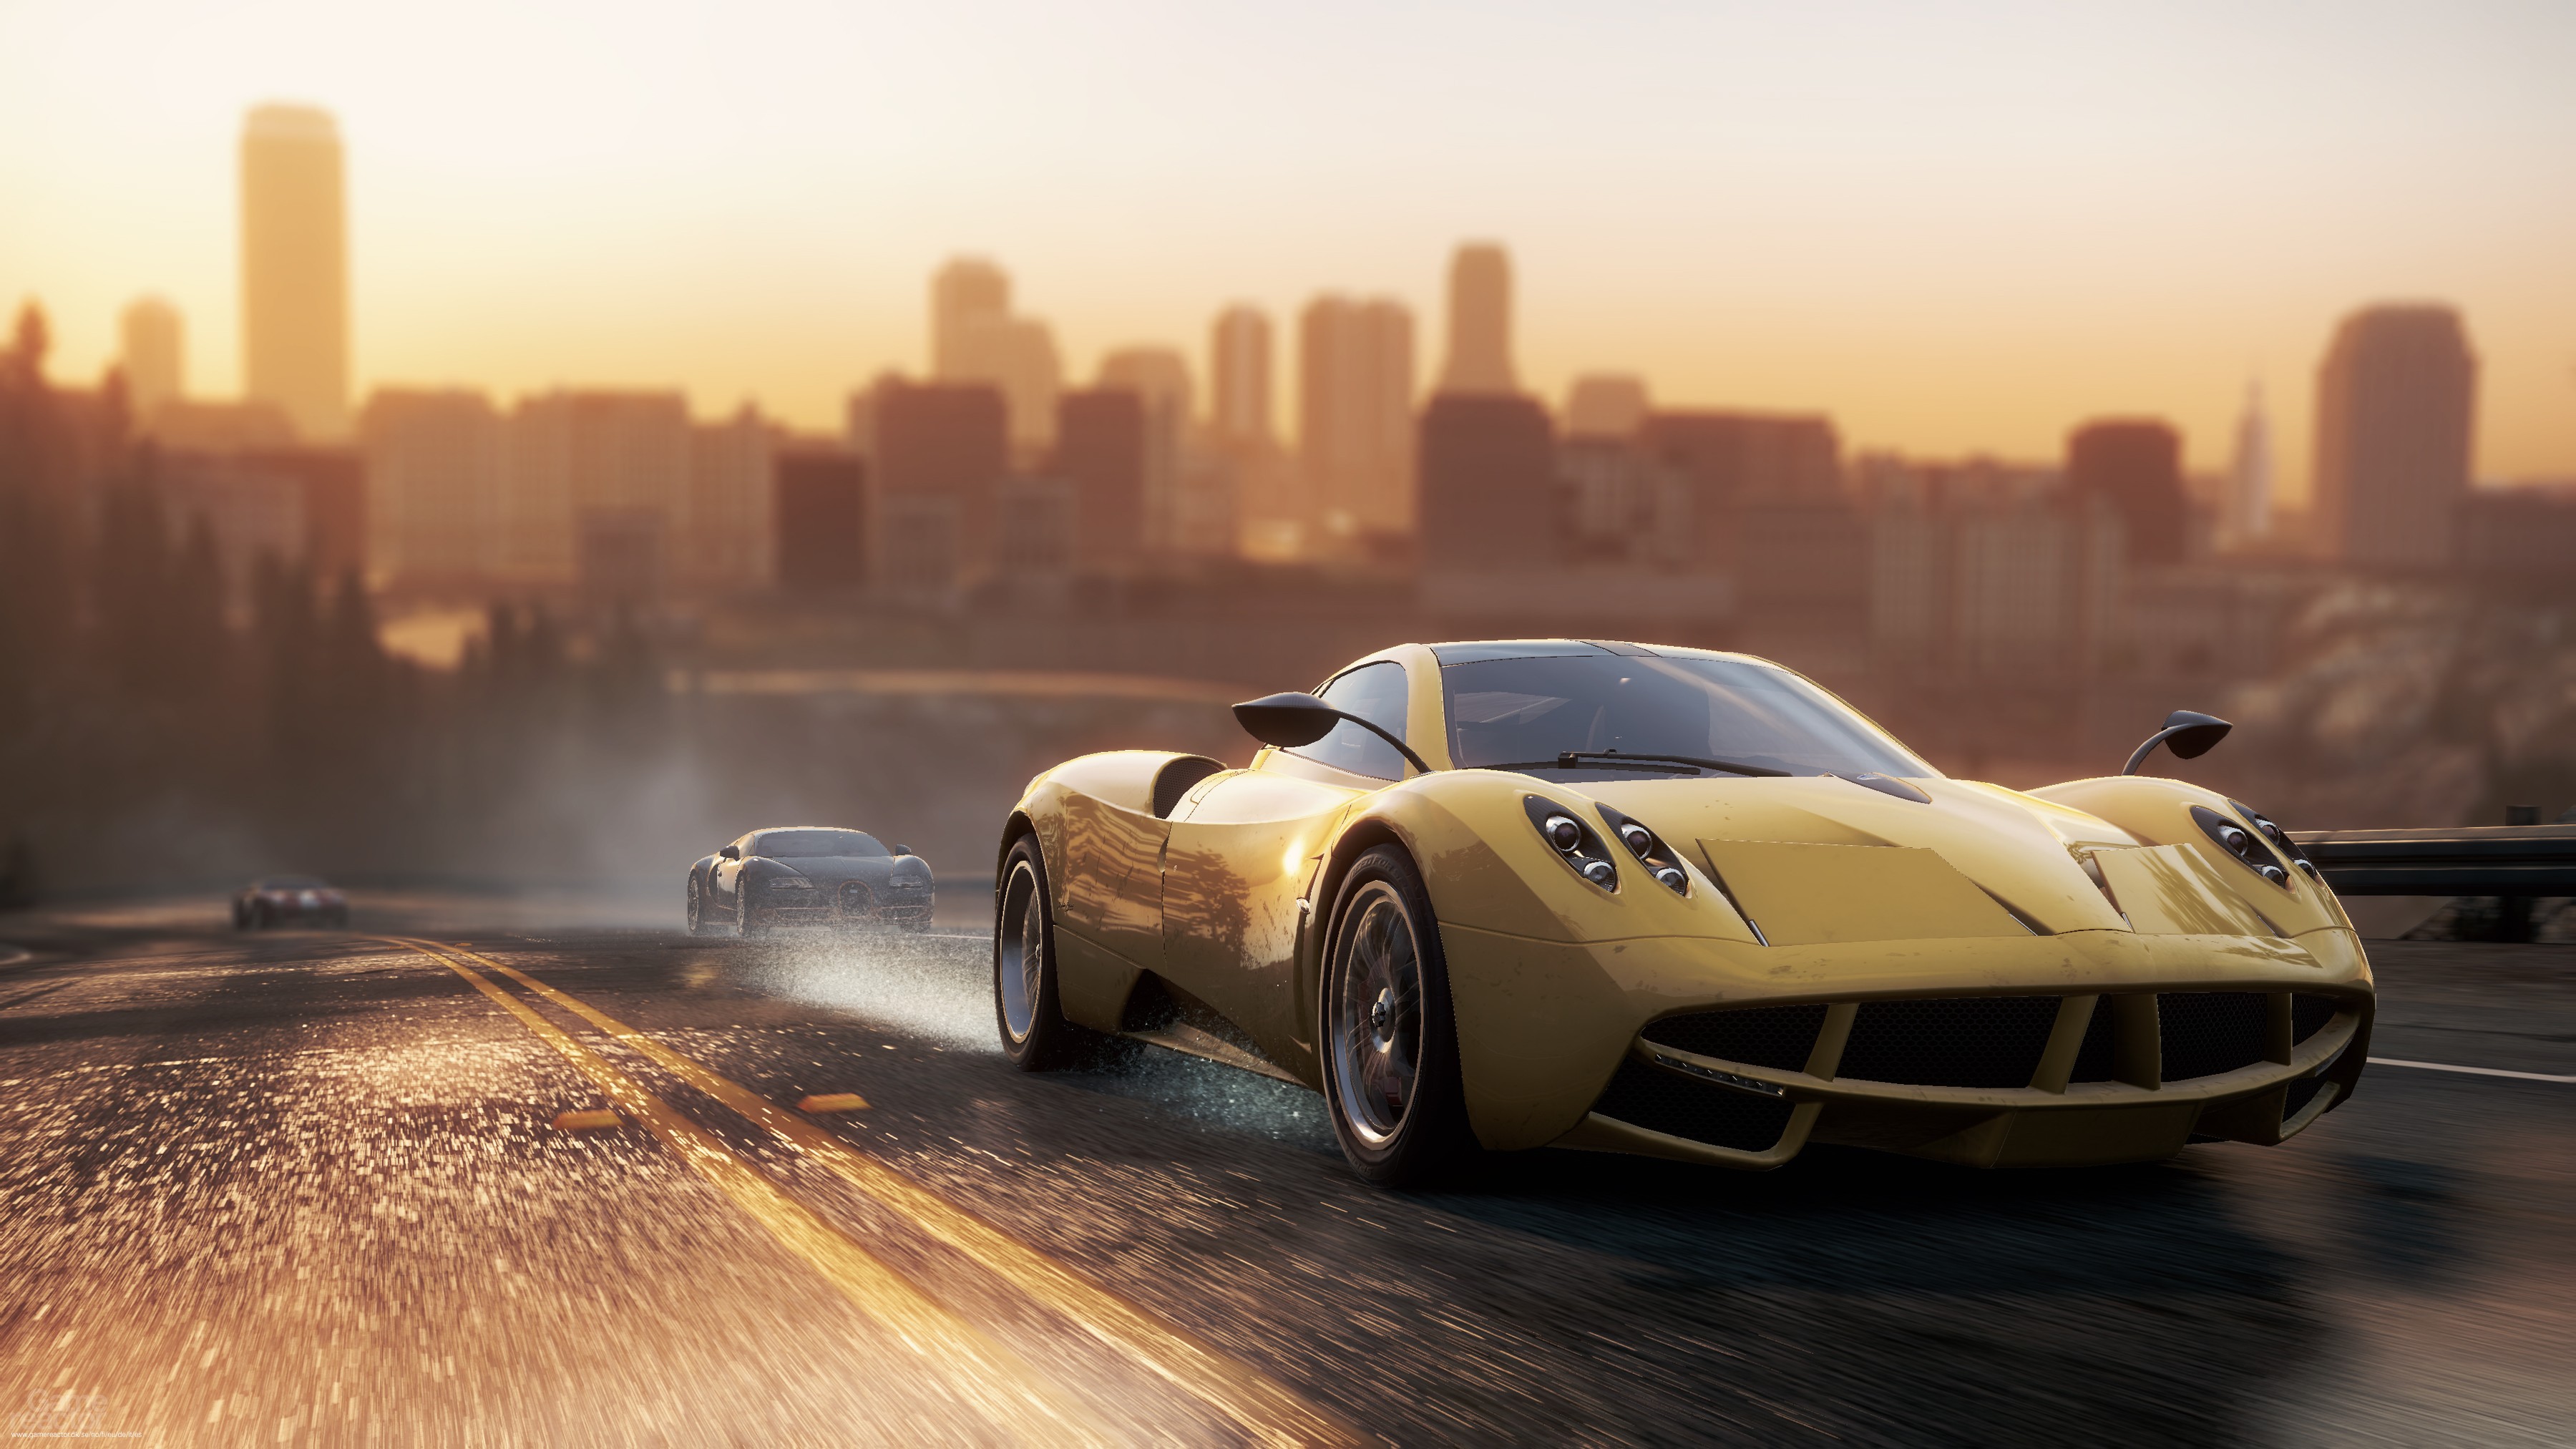 Игра машинки мост. Need for Speed most wanted 2012 Пагани. Pagani Huayra most wanted 2012. Нфс мост вантед 2. NFS 2012.